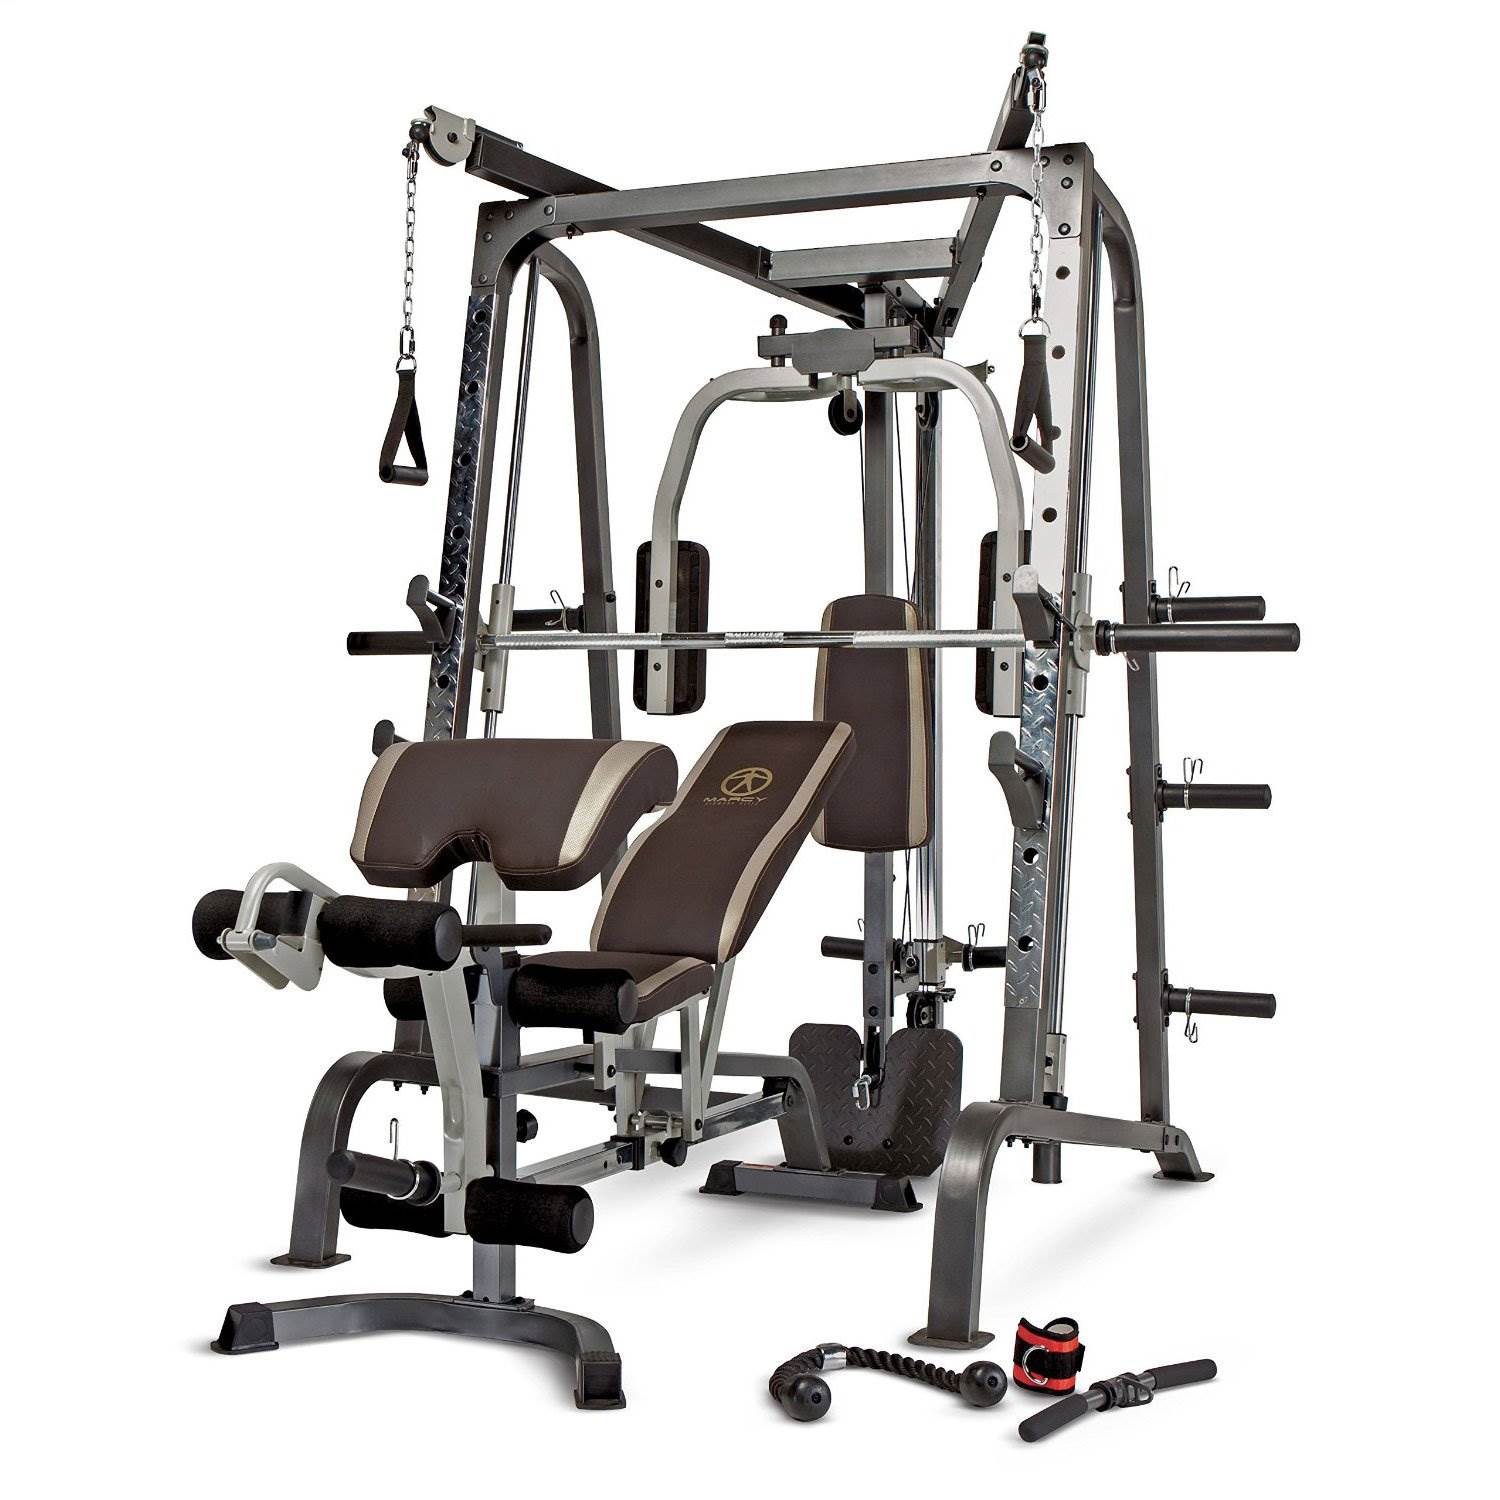 Marcy Diamond Elite Olympic Smith Cage Machine, Plate Loaded Home Gym Total Body Workout Machine (MD-9010G) - image 1 of 13